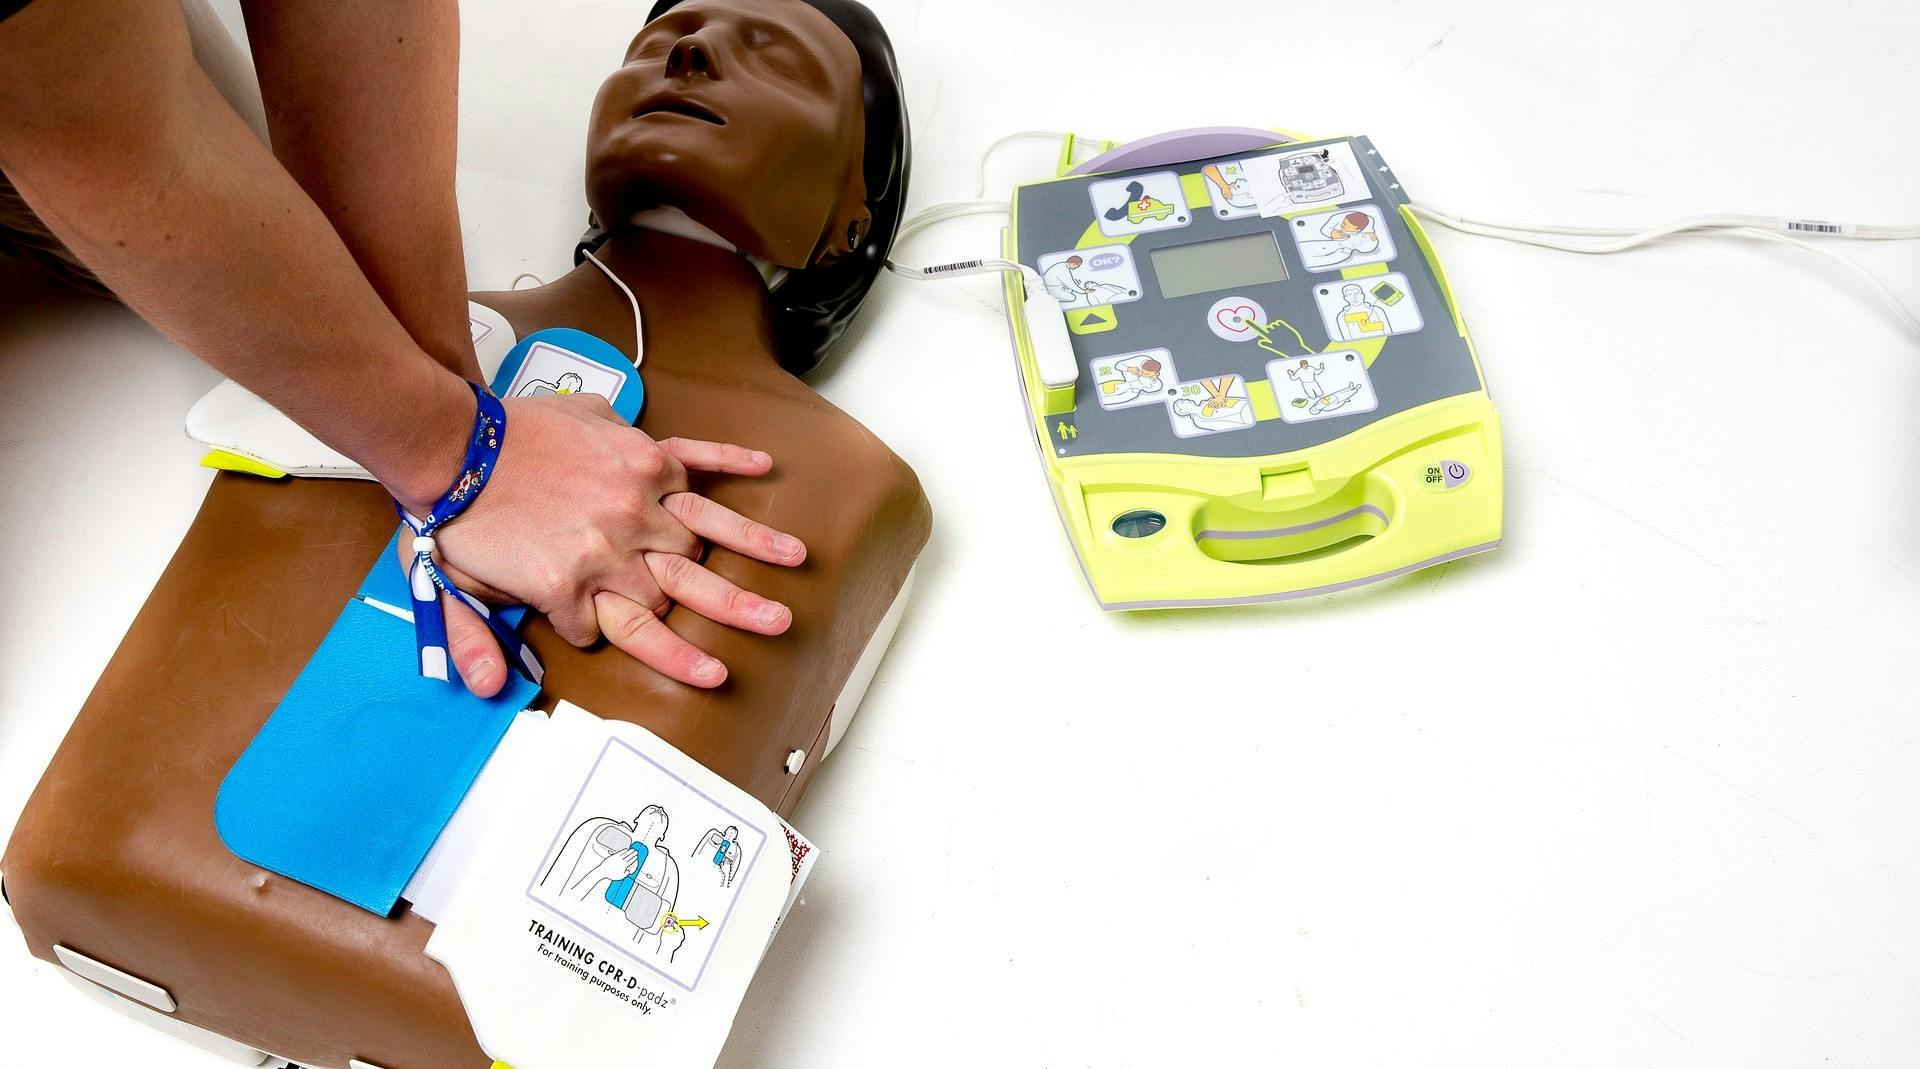 Basic Life Support and Safe use of an Automated External